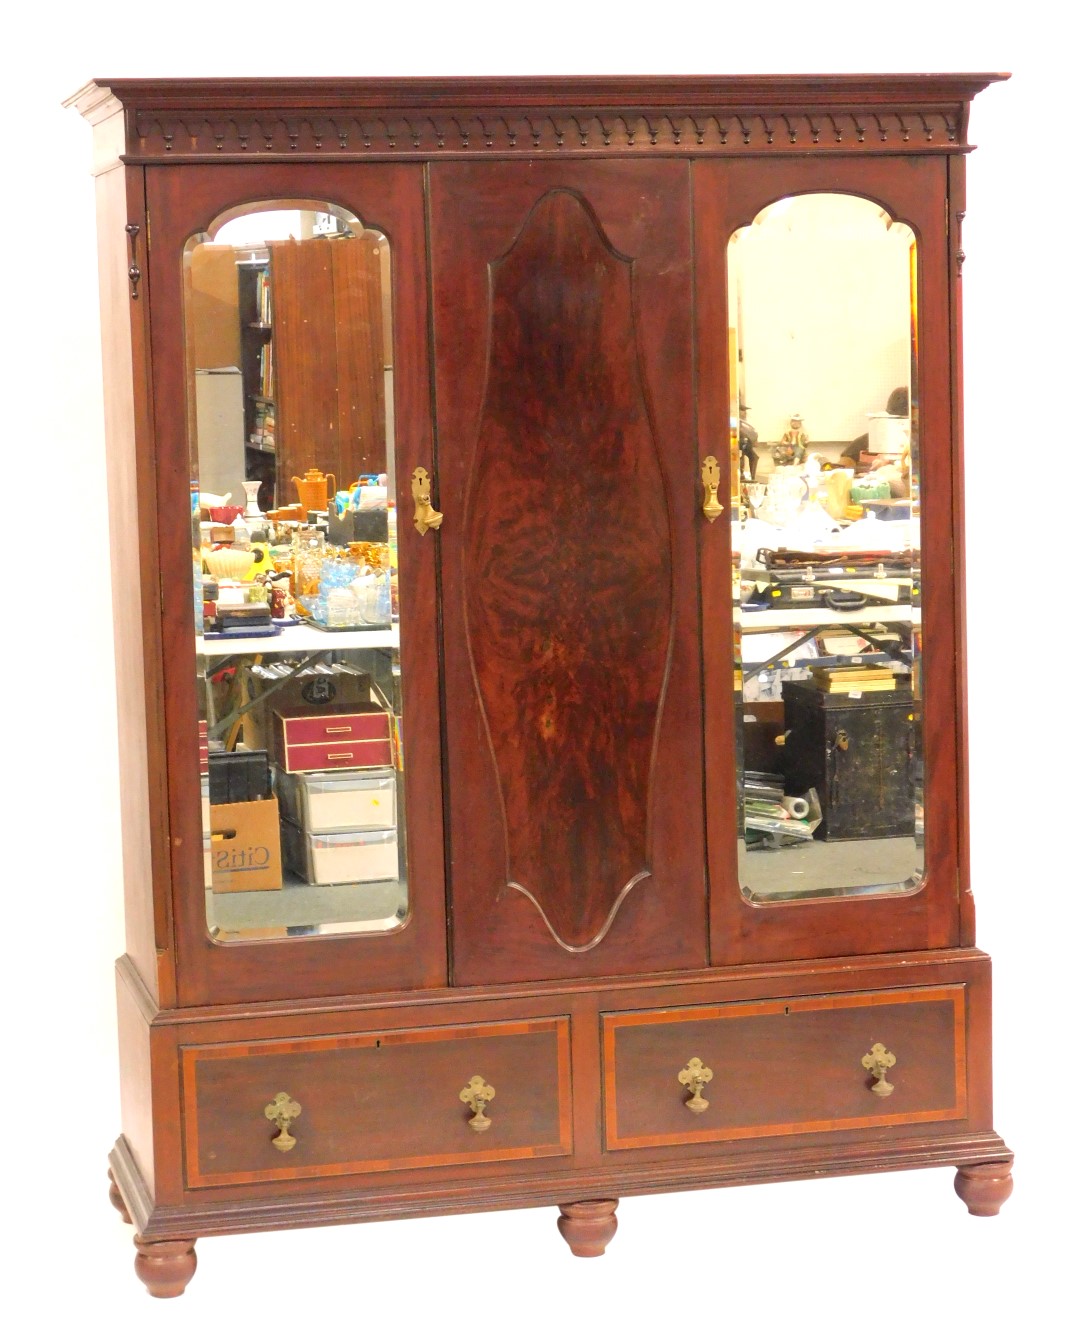 An Edwardian mahogany and flamed mahogany wardrobe, the top with a moulded cornice above a lappet bo